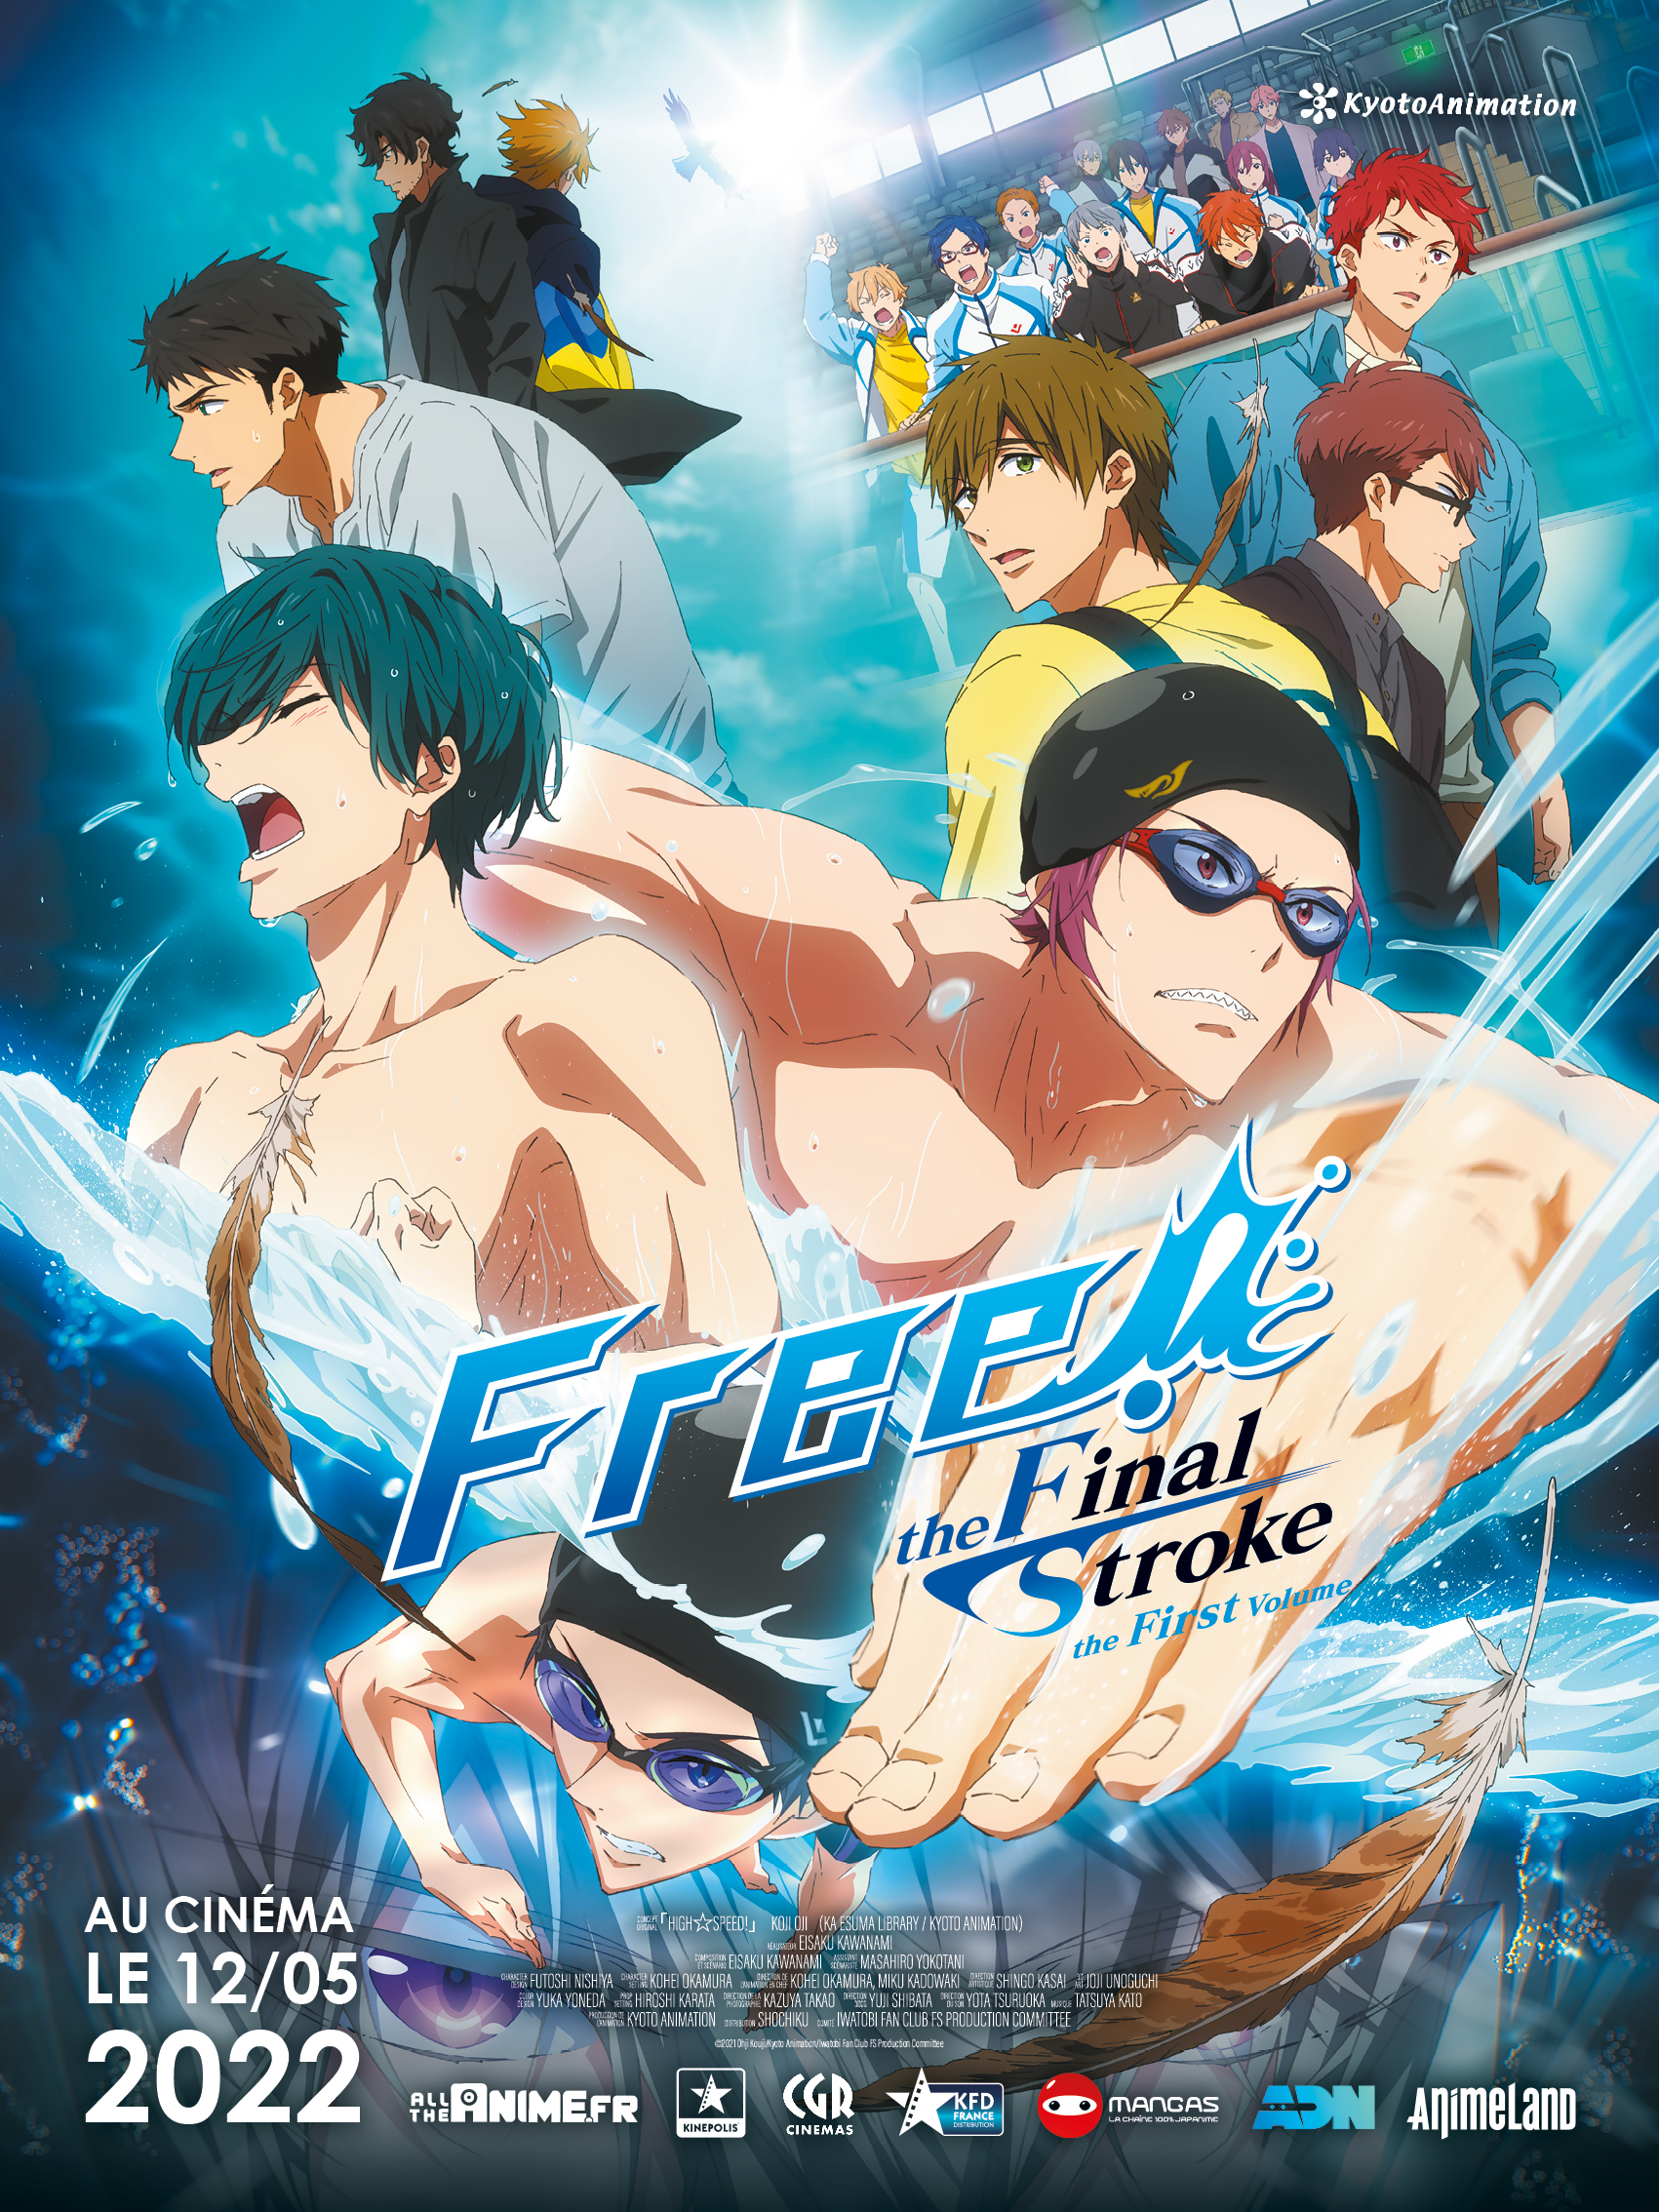 FREE! THE FINAL STROKE - THE FIRST VOLUME